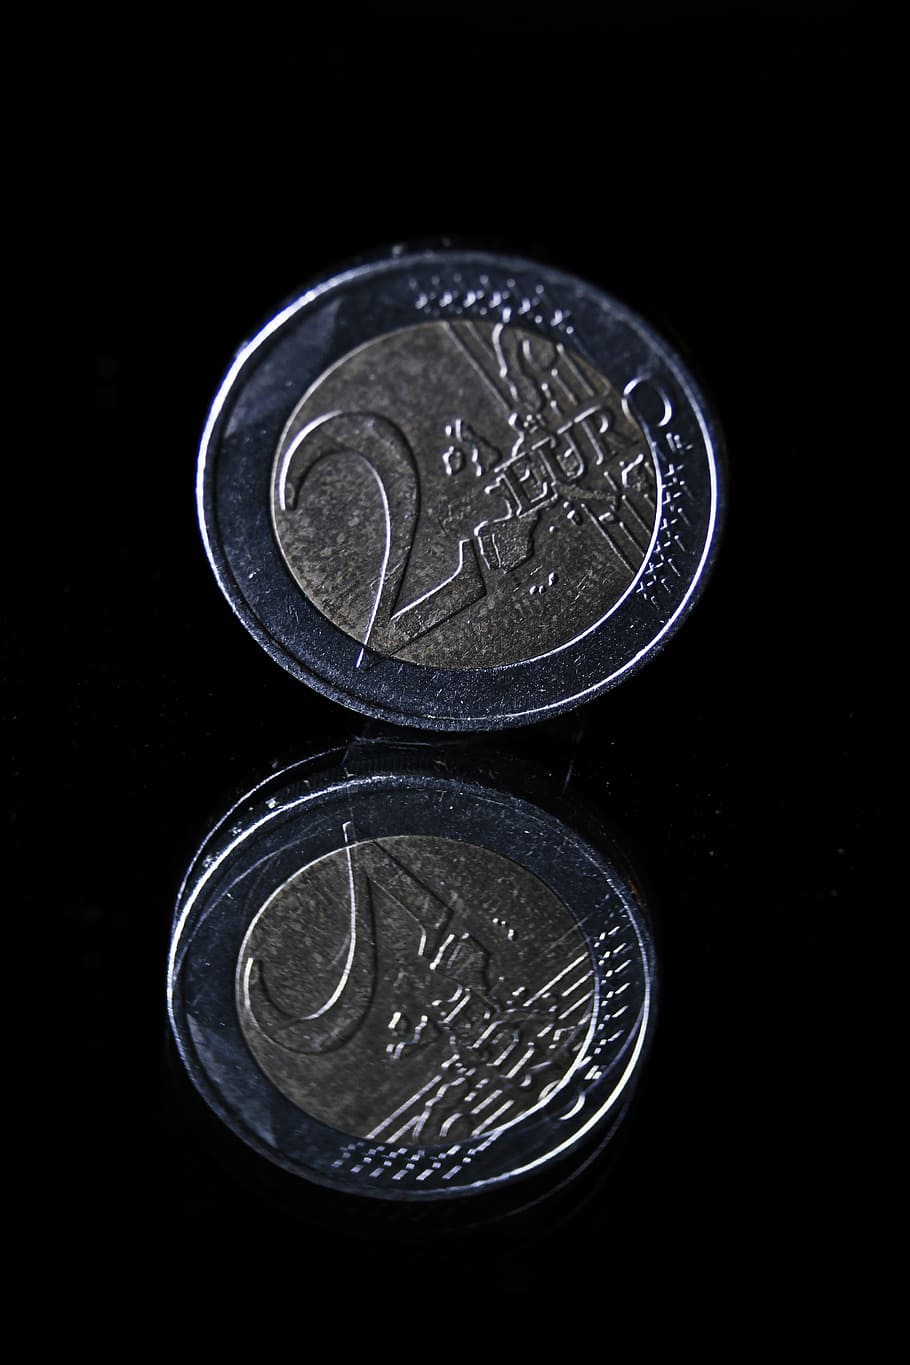 coin, euro, currency, money, loose change, € coin, metal money, mirroring, 2 pieces, finance